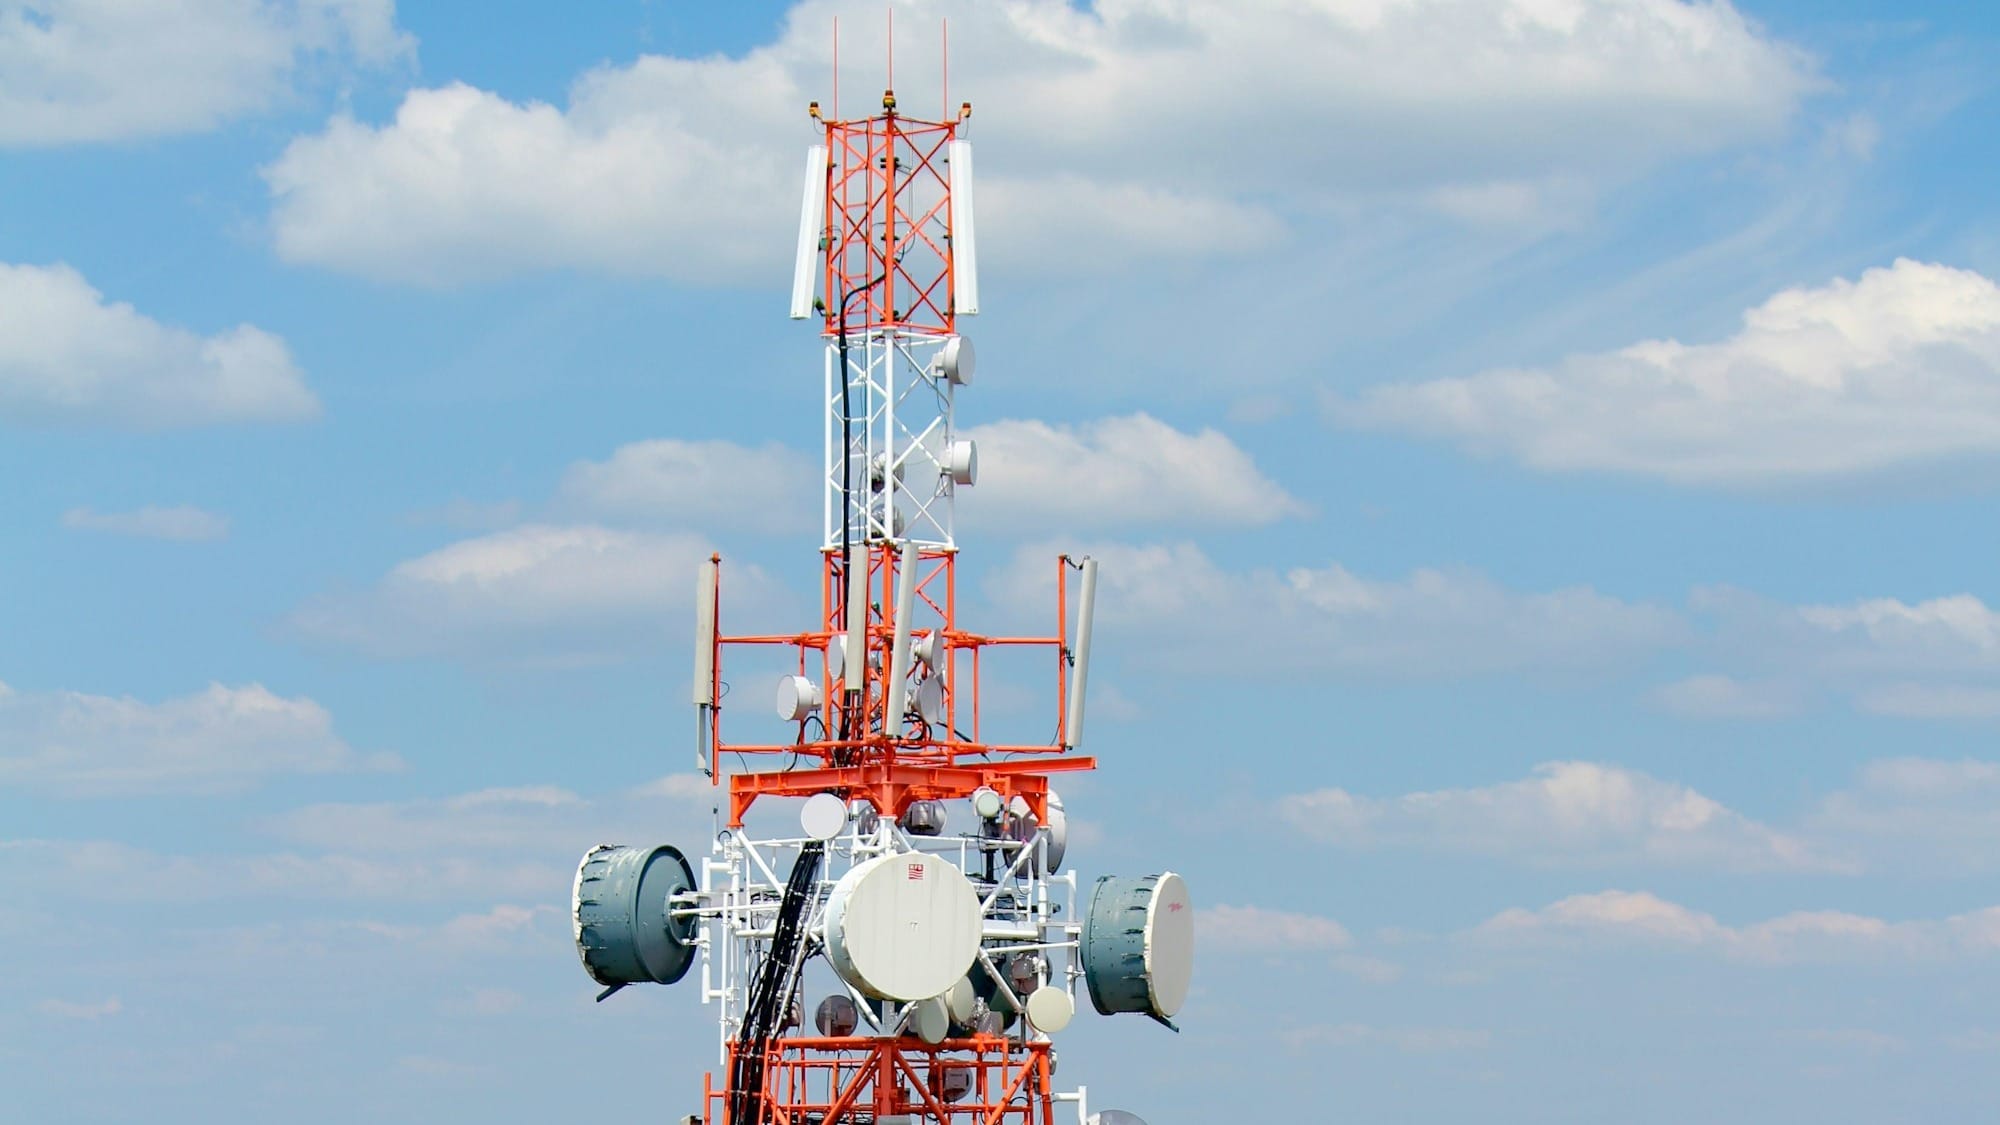 Interswitch is venturing into the Nigerian telecoms market